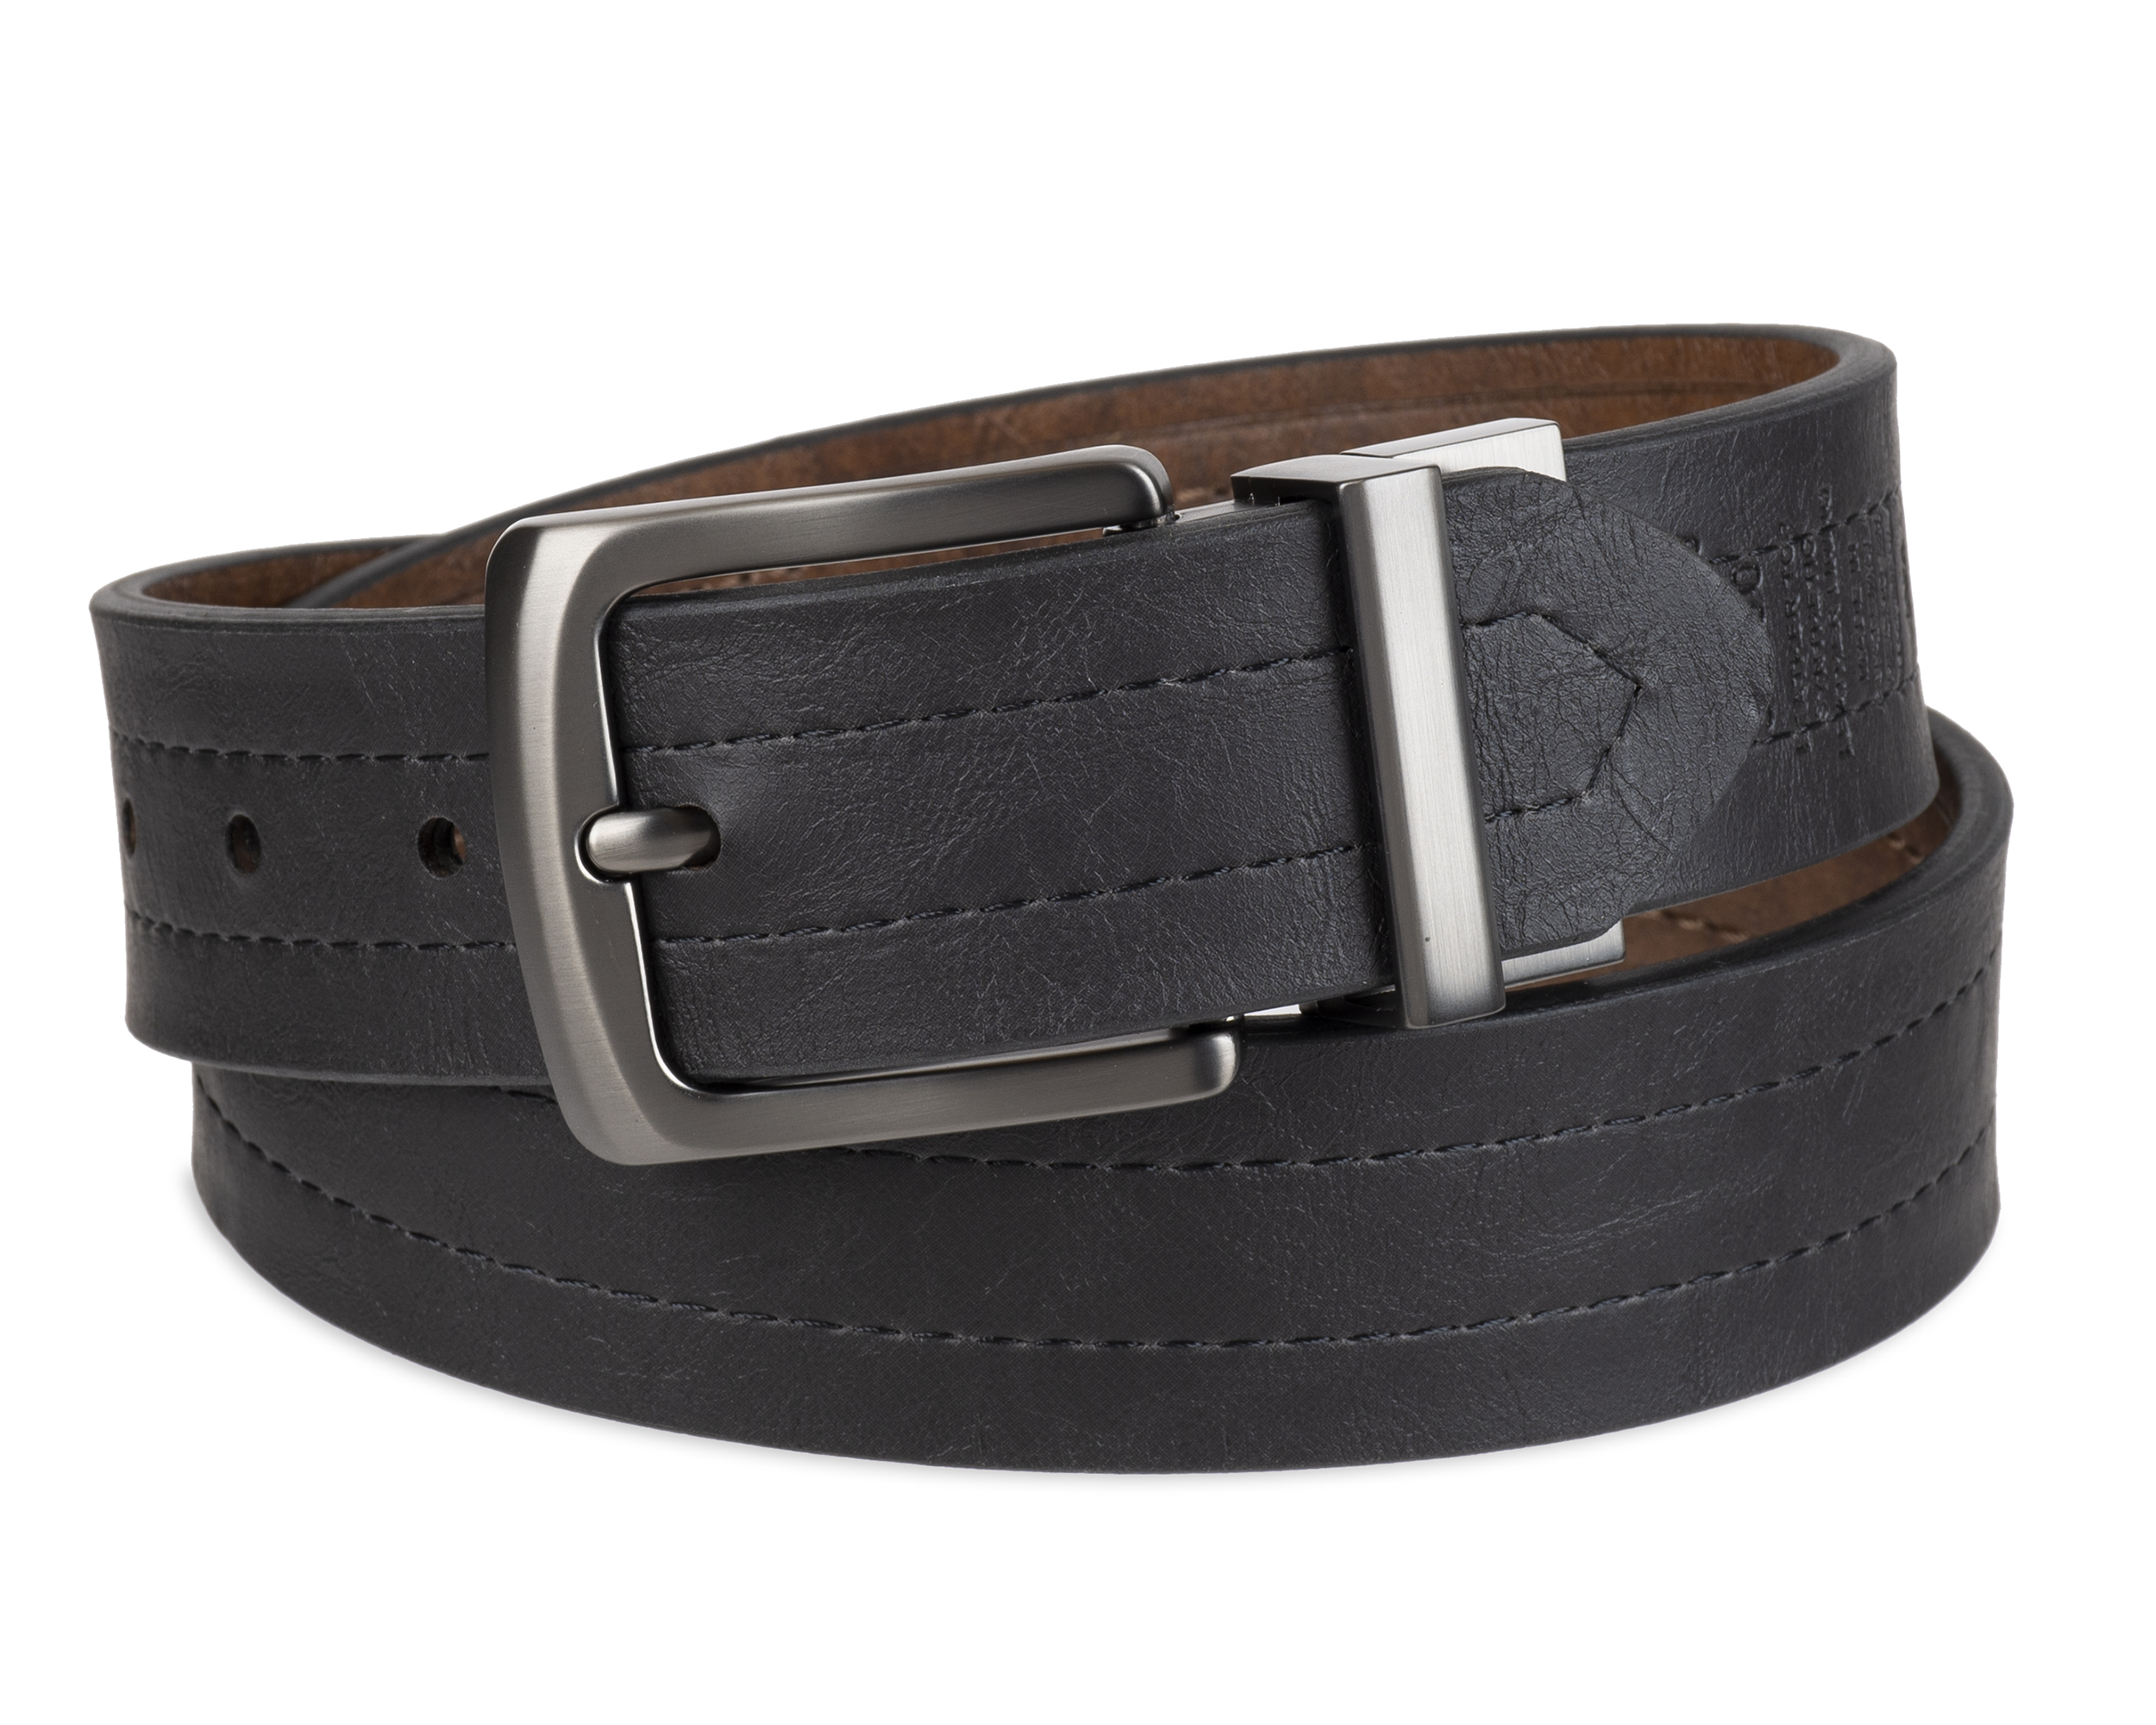 Levi's Men's Two-in-One Reversible Casual Belt, Brown/Black - image 4 of 8